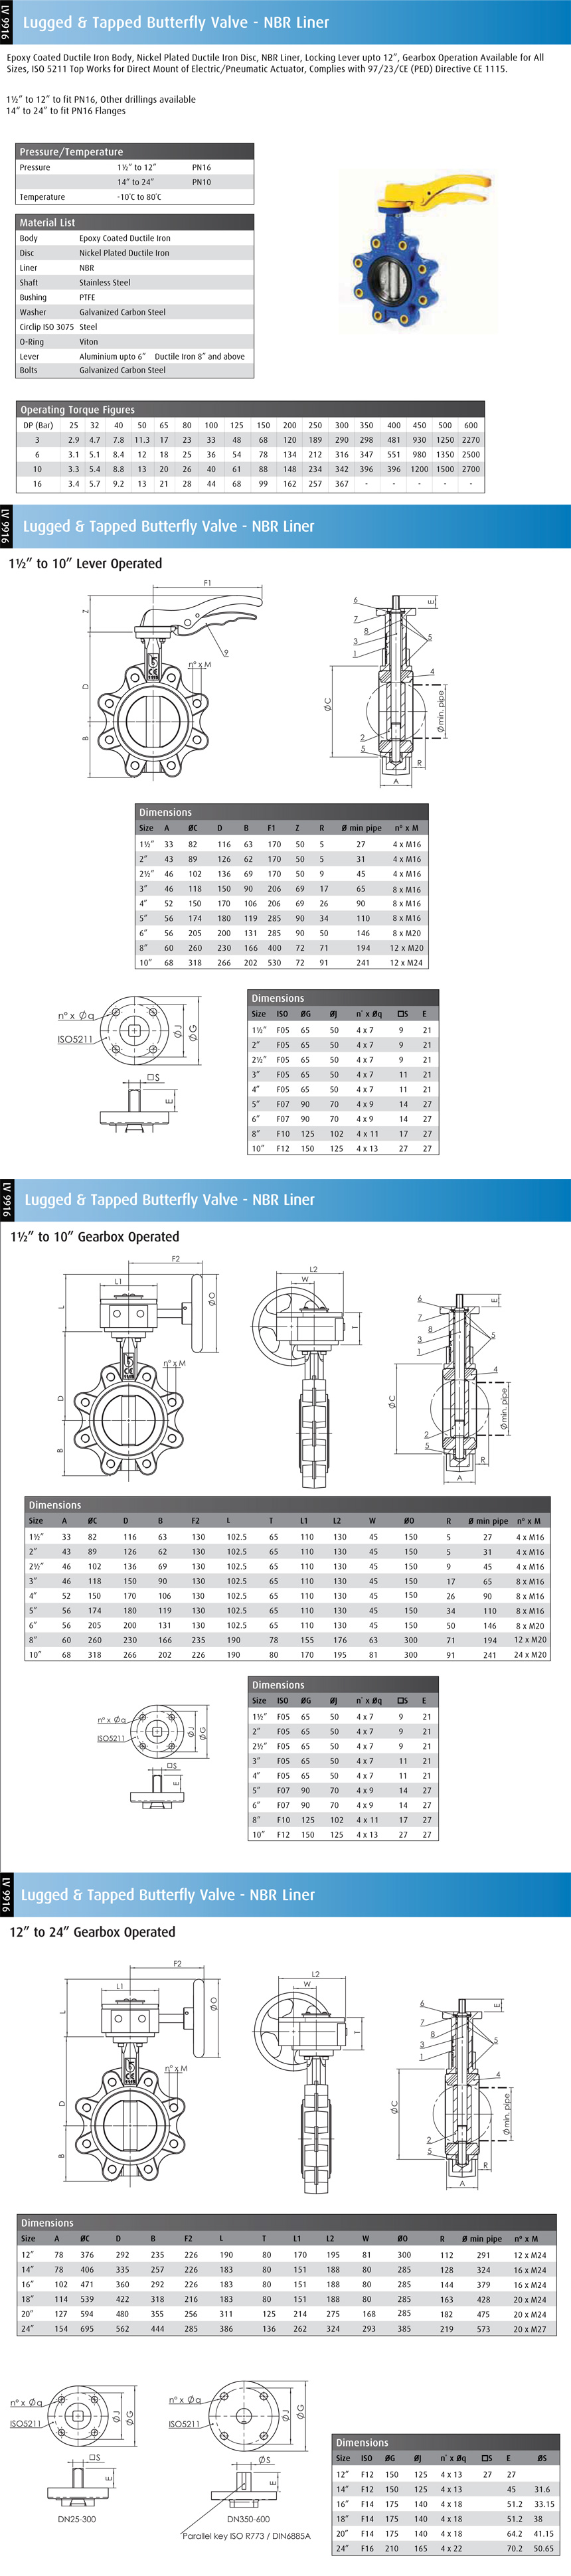 Lugged and Tapped Butterfly Valve - NBR Liner